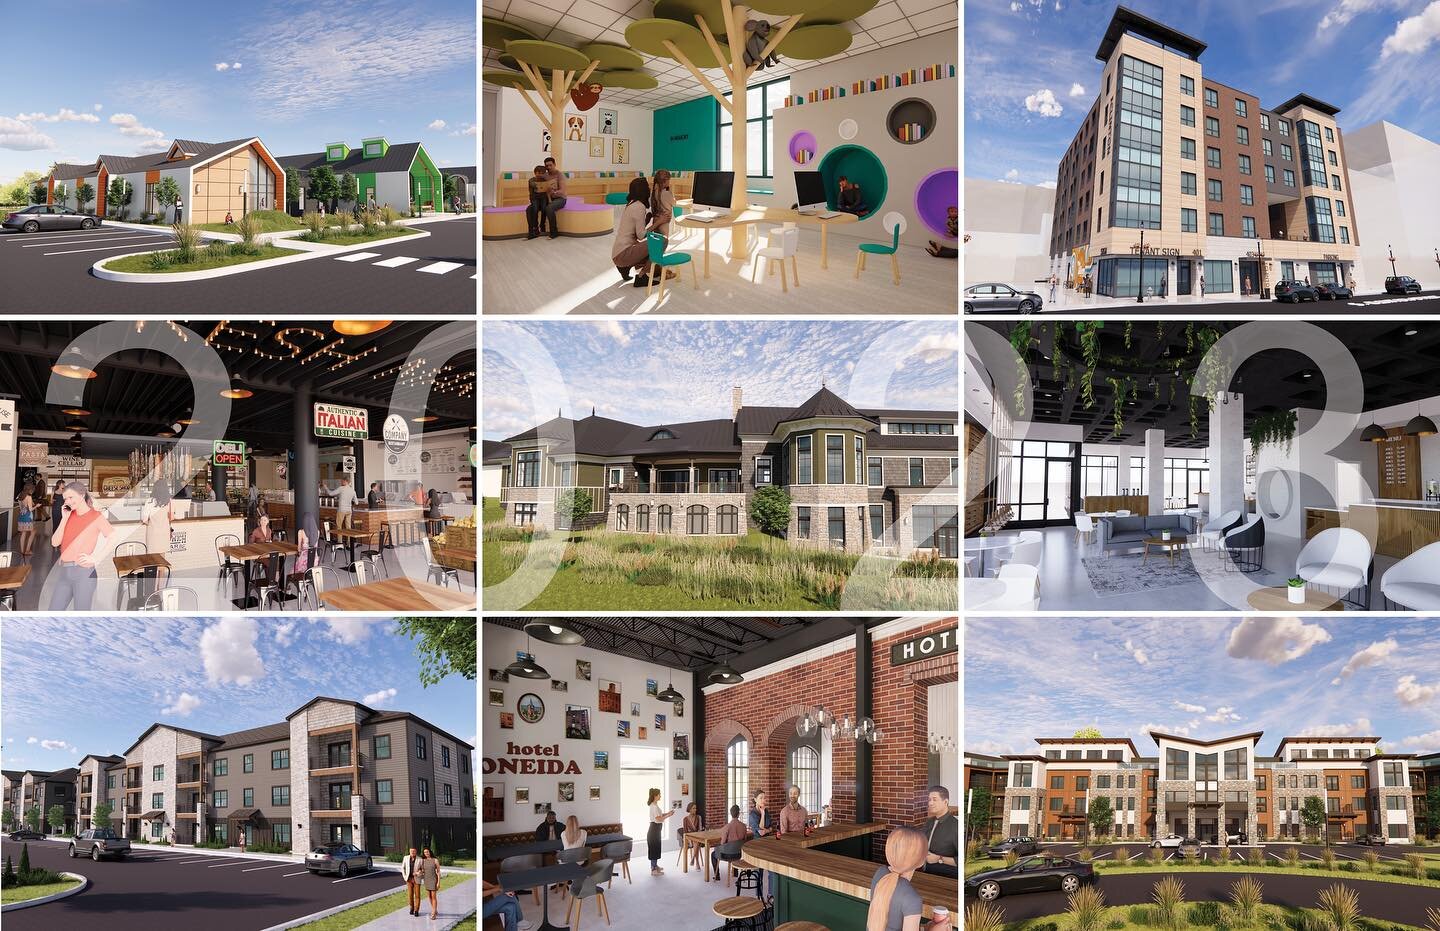 2023 was another INcredible year 👏 

Can&rsquo;t wait to see what 2024 has in store for us 🎉🤩 
.
.
#2023 #2023projects #yearinreview #inspired #inclusive #innovative #architecture #interiordesign #design  #office #residential #adaptivereuse #hospi